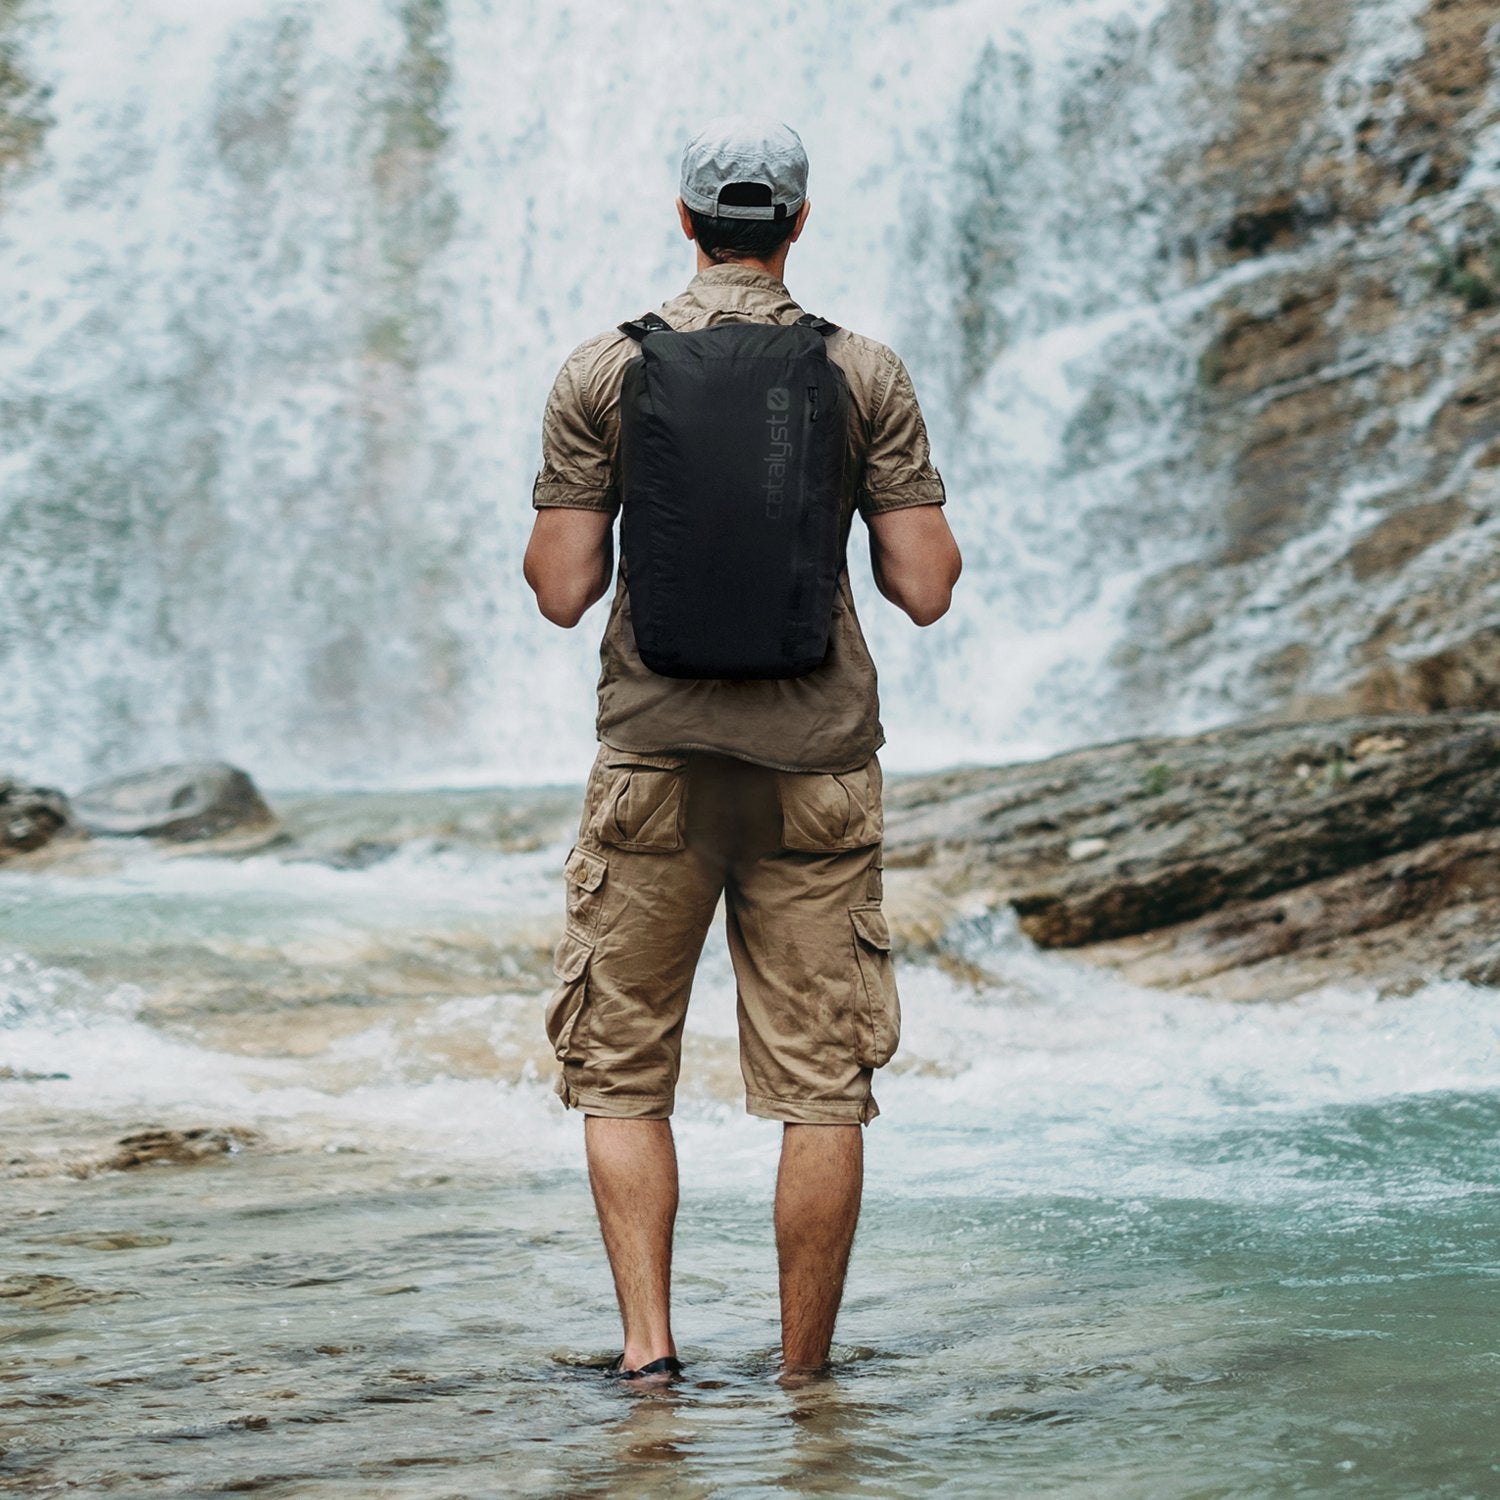 catalyst waterproof 20l backpack man with a cap waterfalls